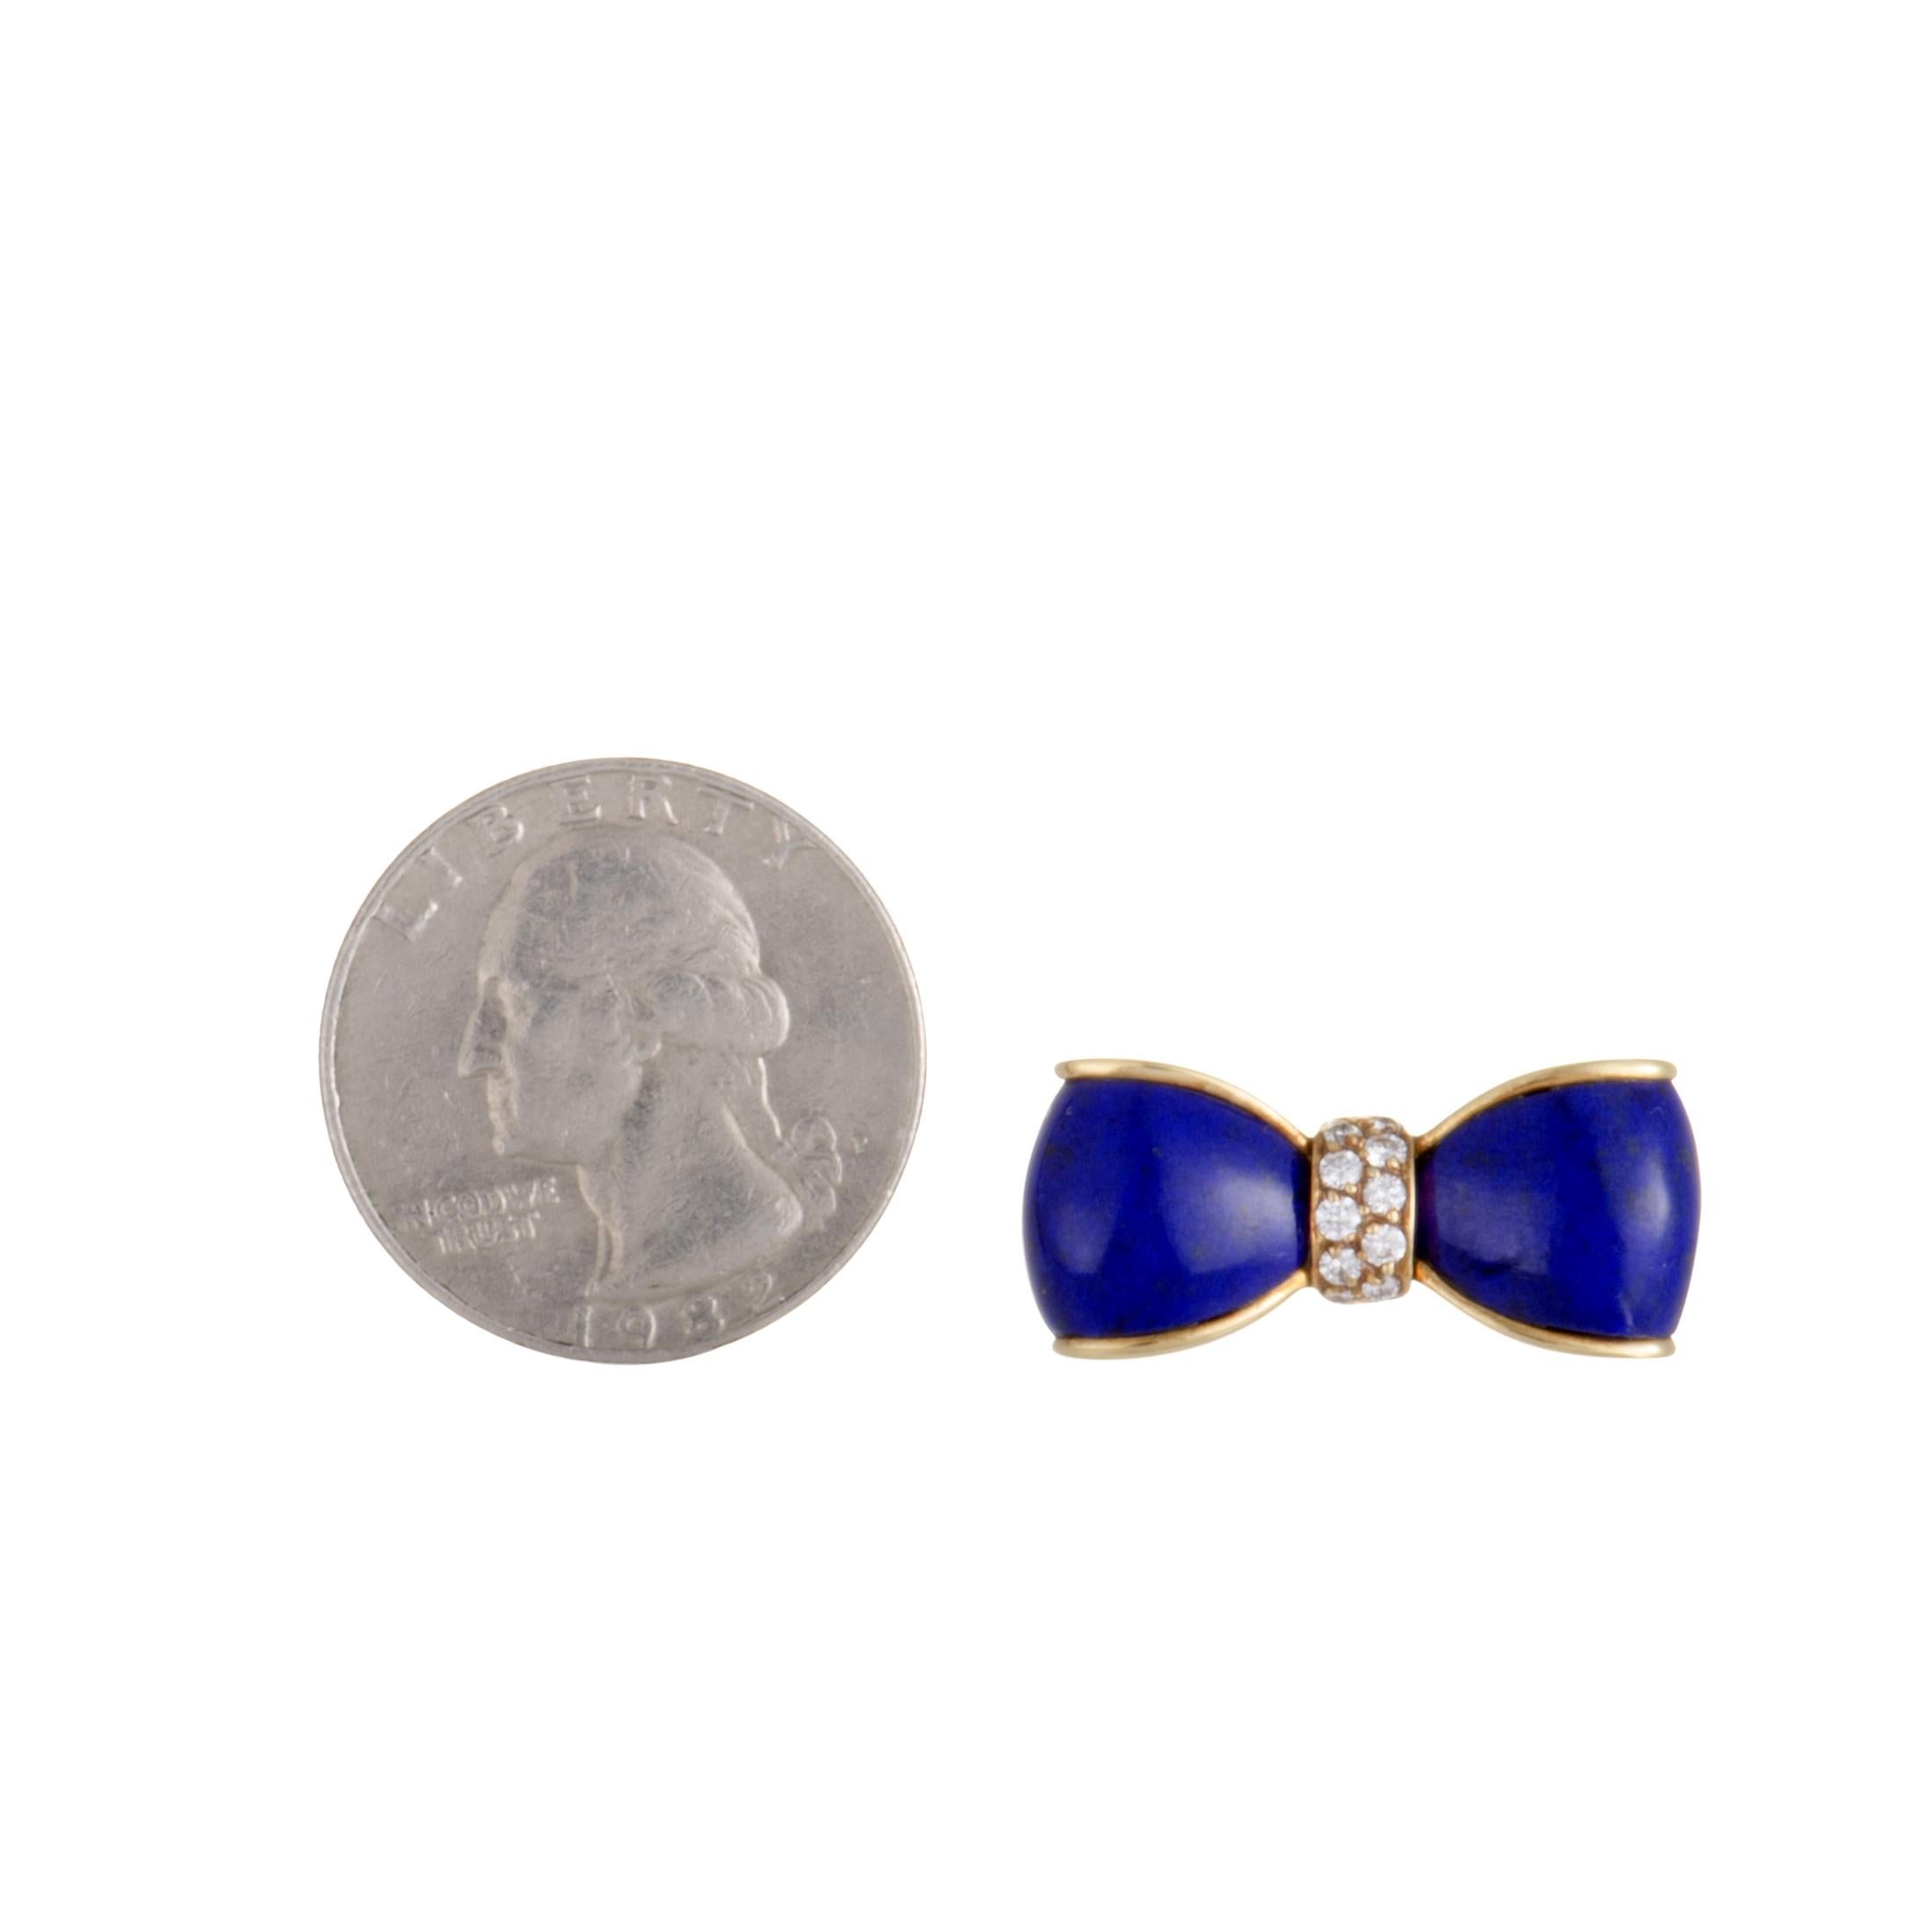 Add a wonderfully feminine touch to your style with this beautiful Van Cleef & Arpels brooch that is made in the form of a charming bow. The brooch is crafted from 18K yellow gold and embellished with lapis lazuli and 0.19 carats of diamond stones.